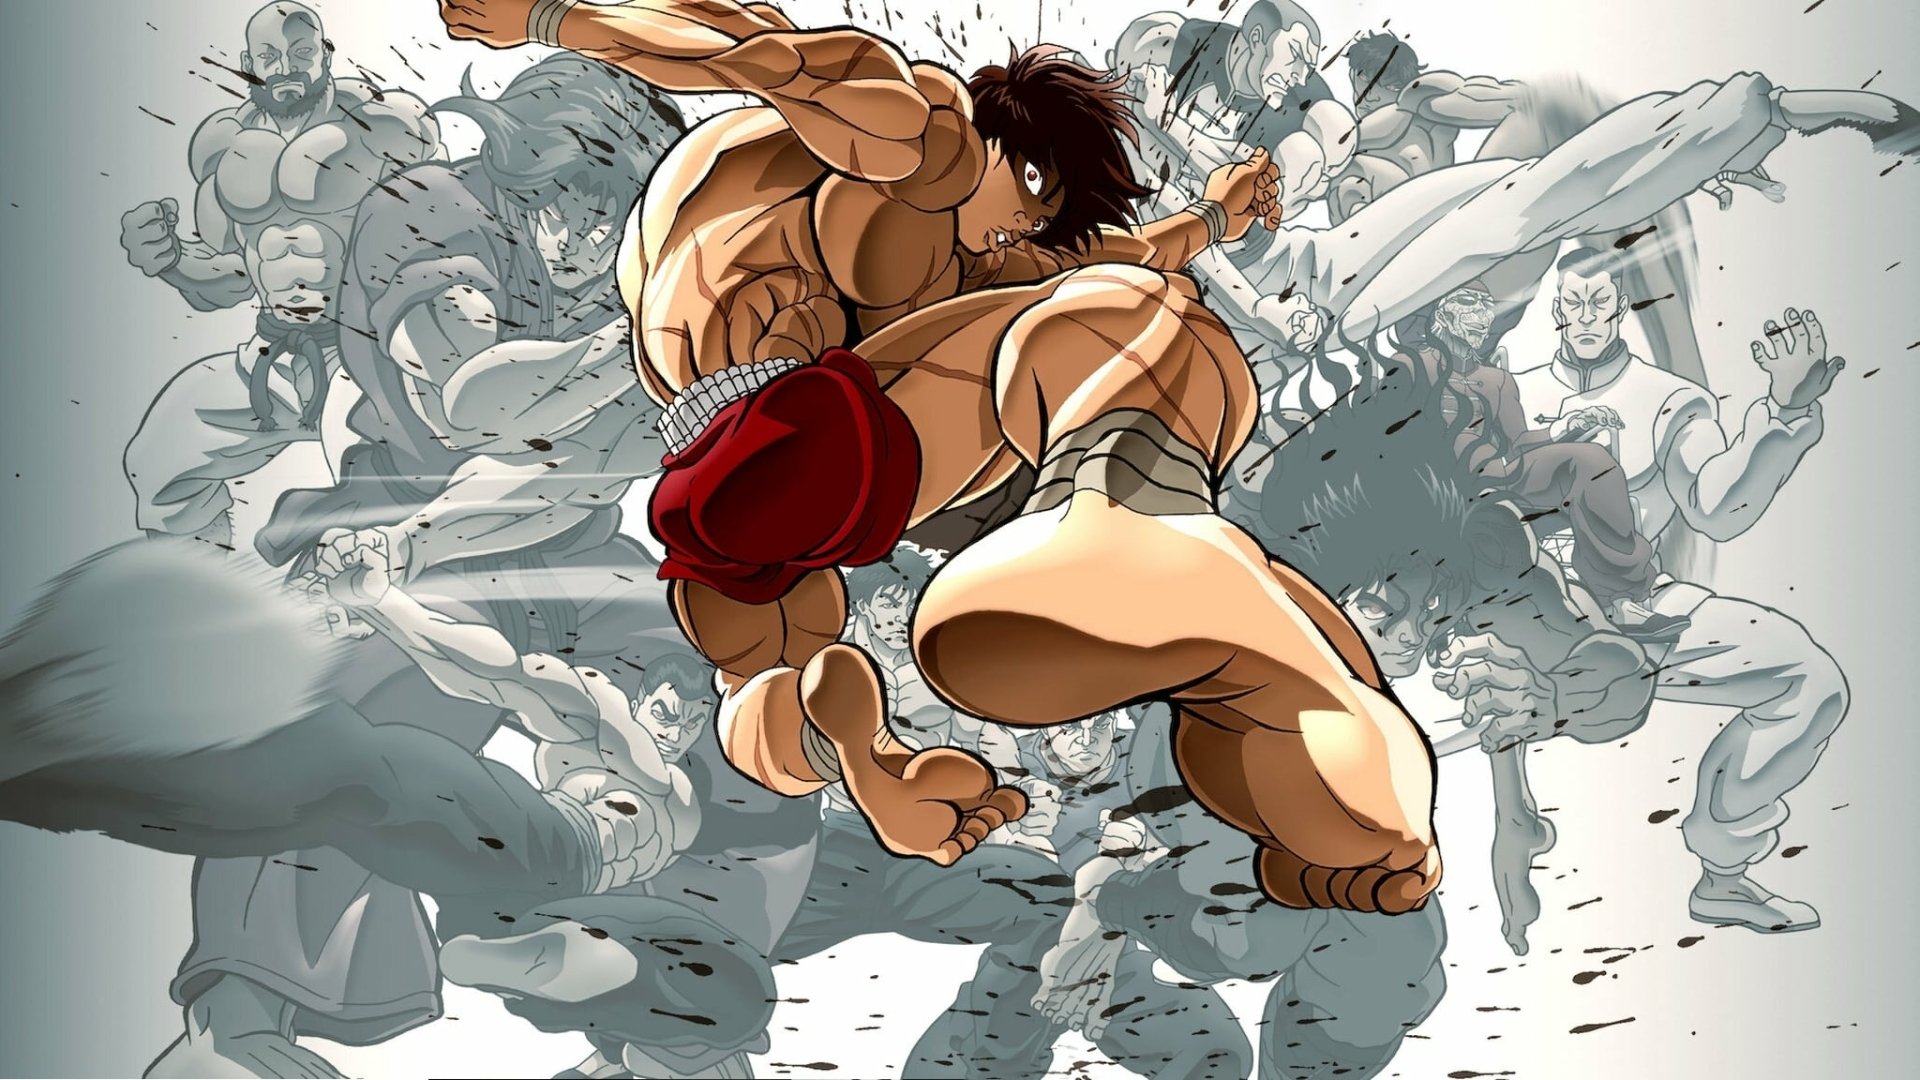 Baki 2018 HD Wallpapers and Backgrounds